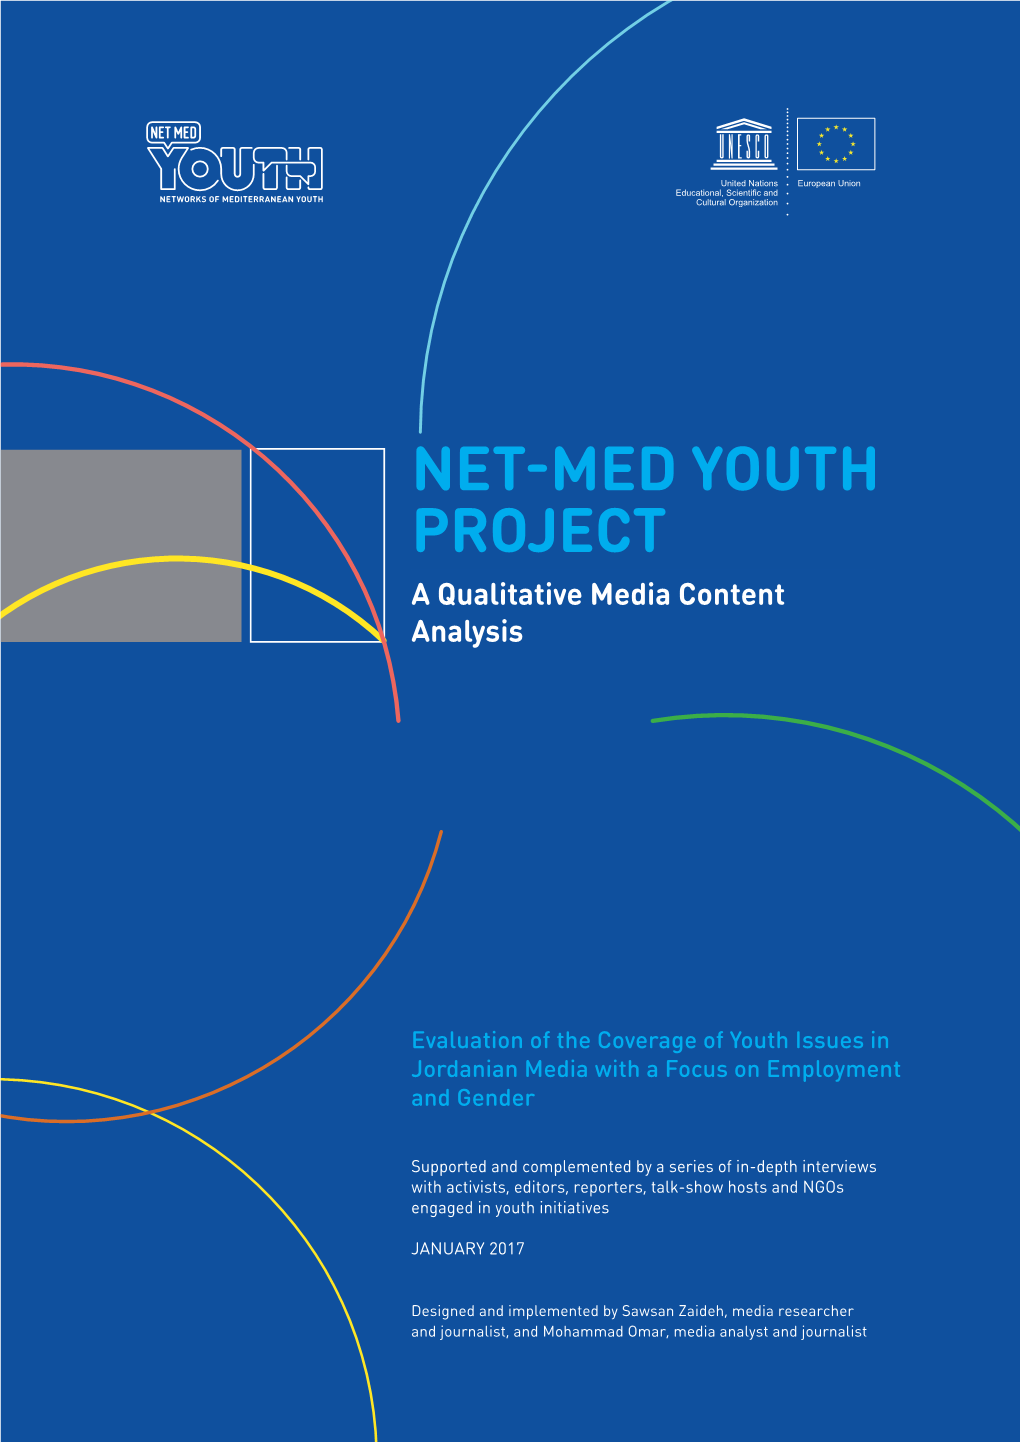 NET-MED YOUTH PROJECT a Qualitative Media Content Analysis